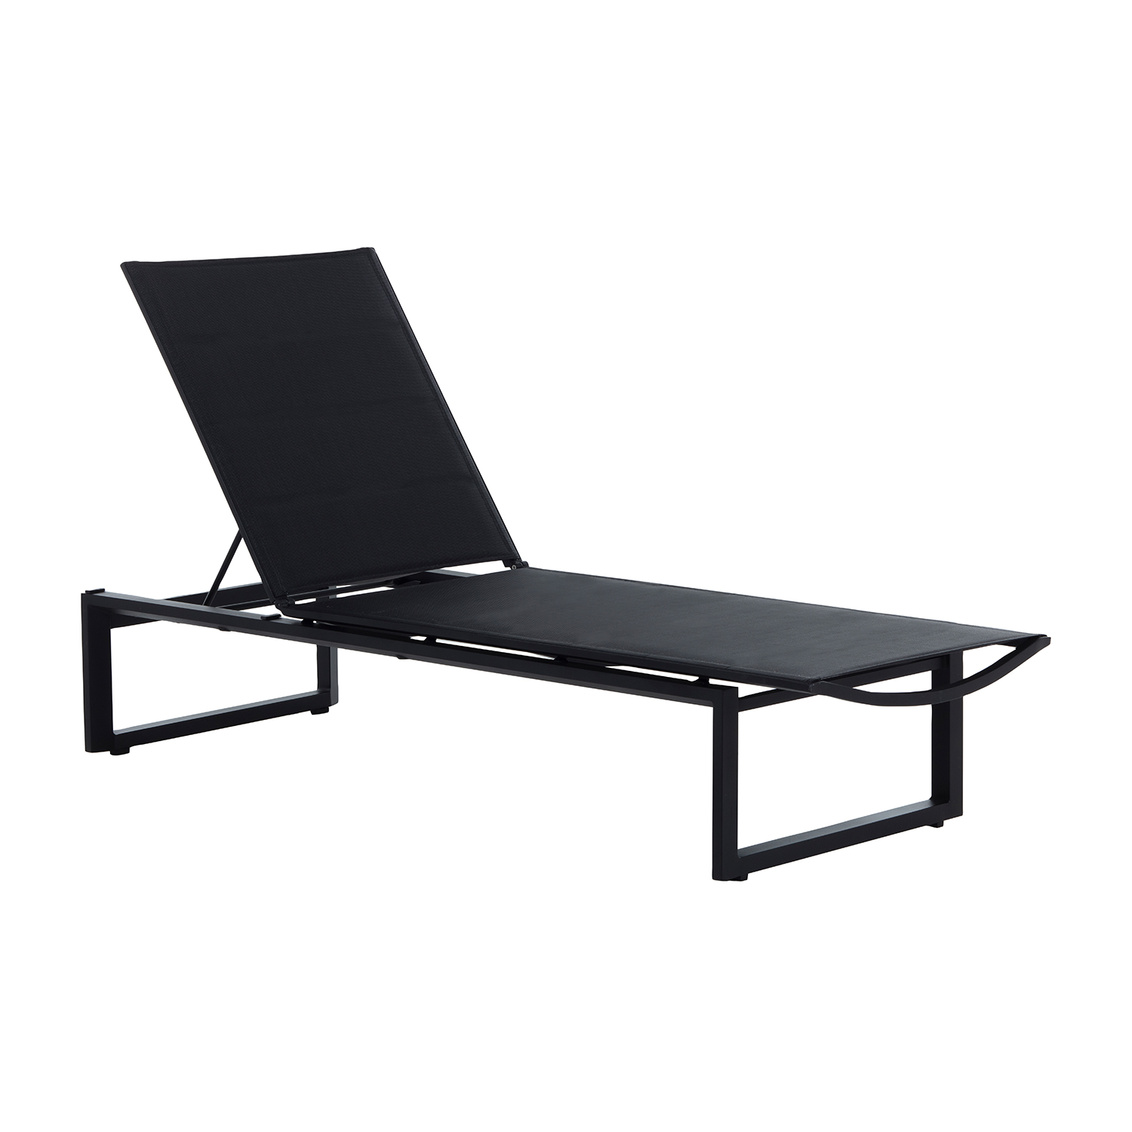 belmont sling chaise in matte black frame and black sling product image